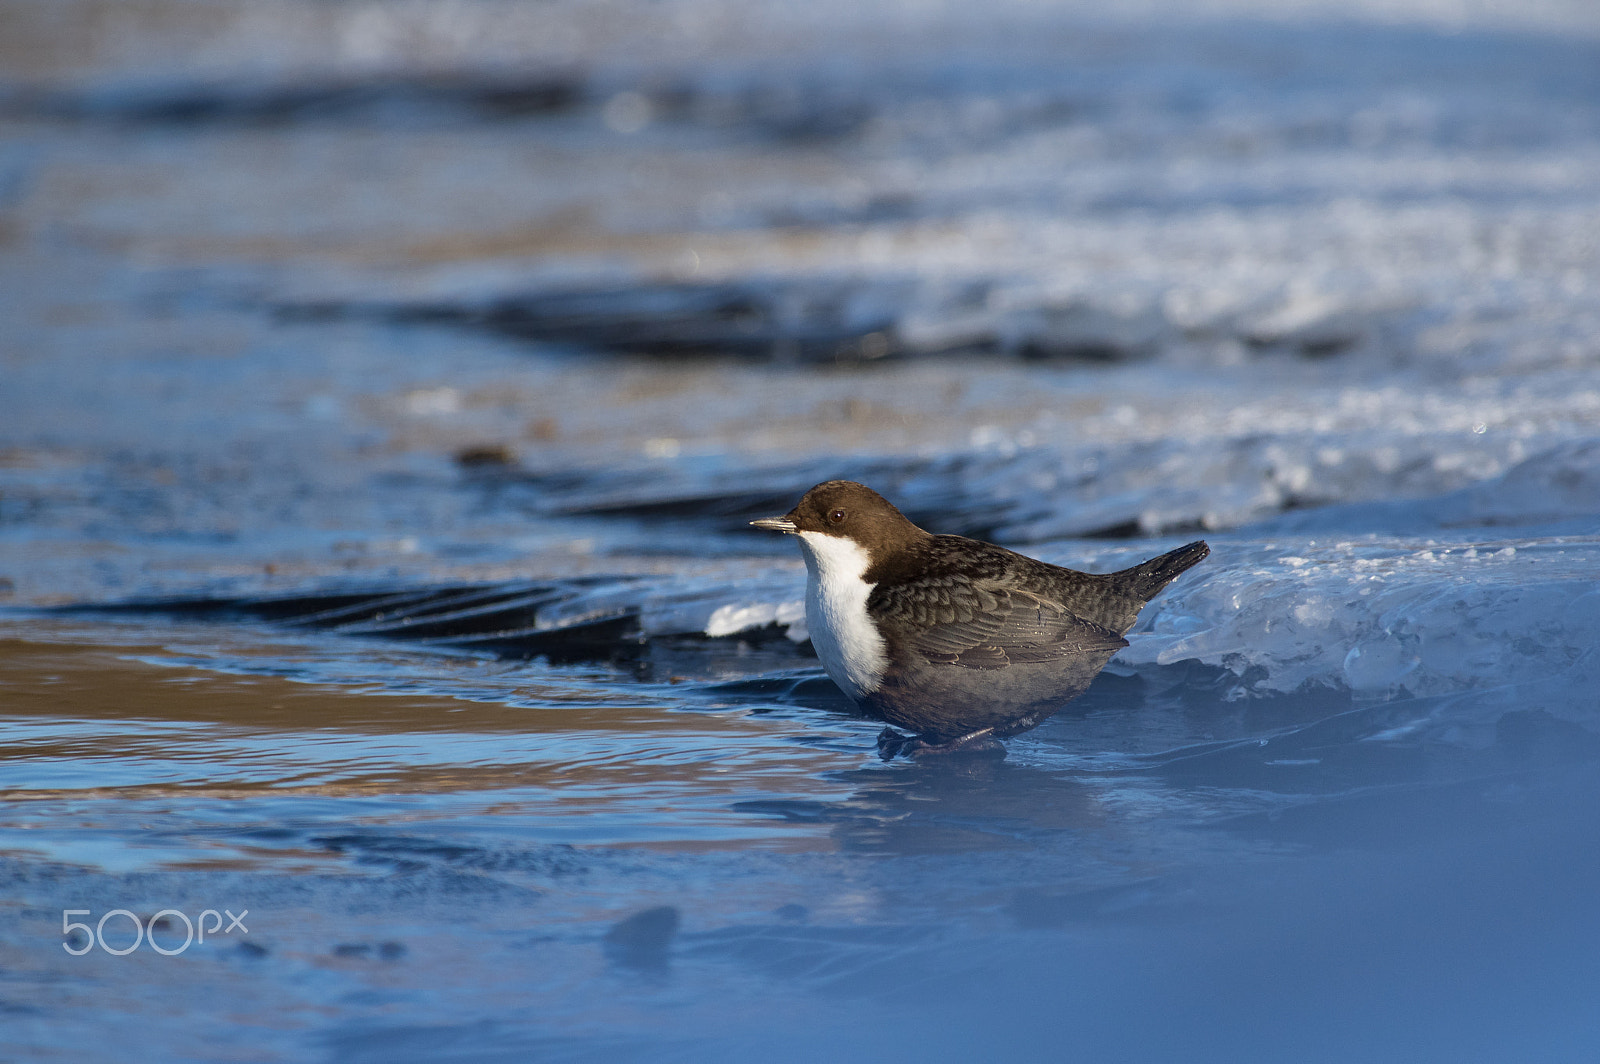 Pentax K-3 sample photo. Dipper in winter photography